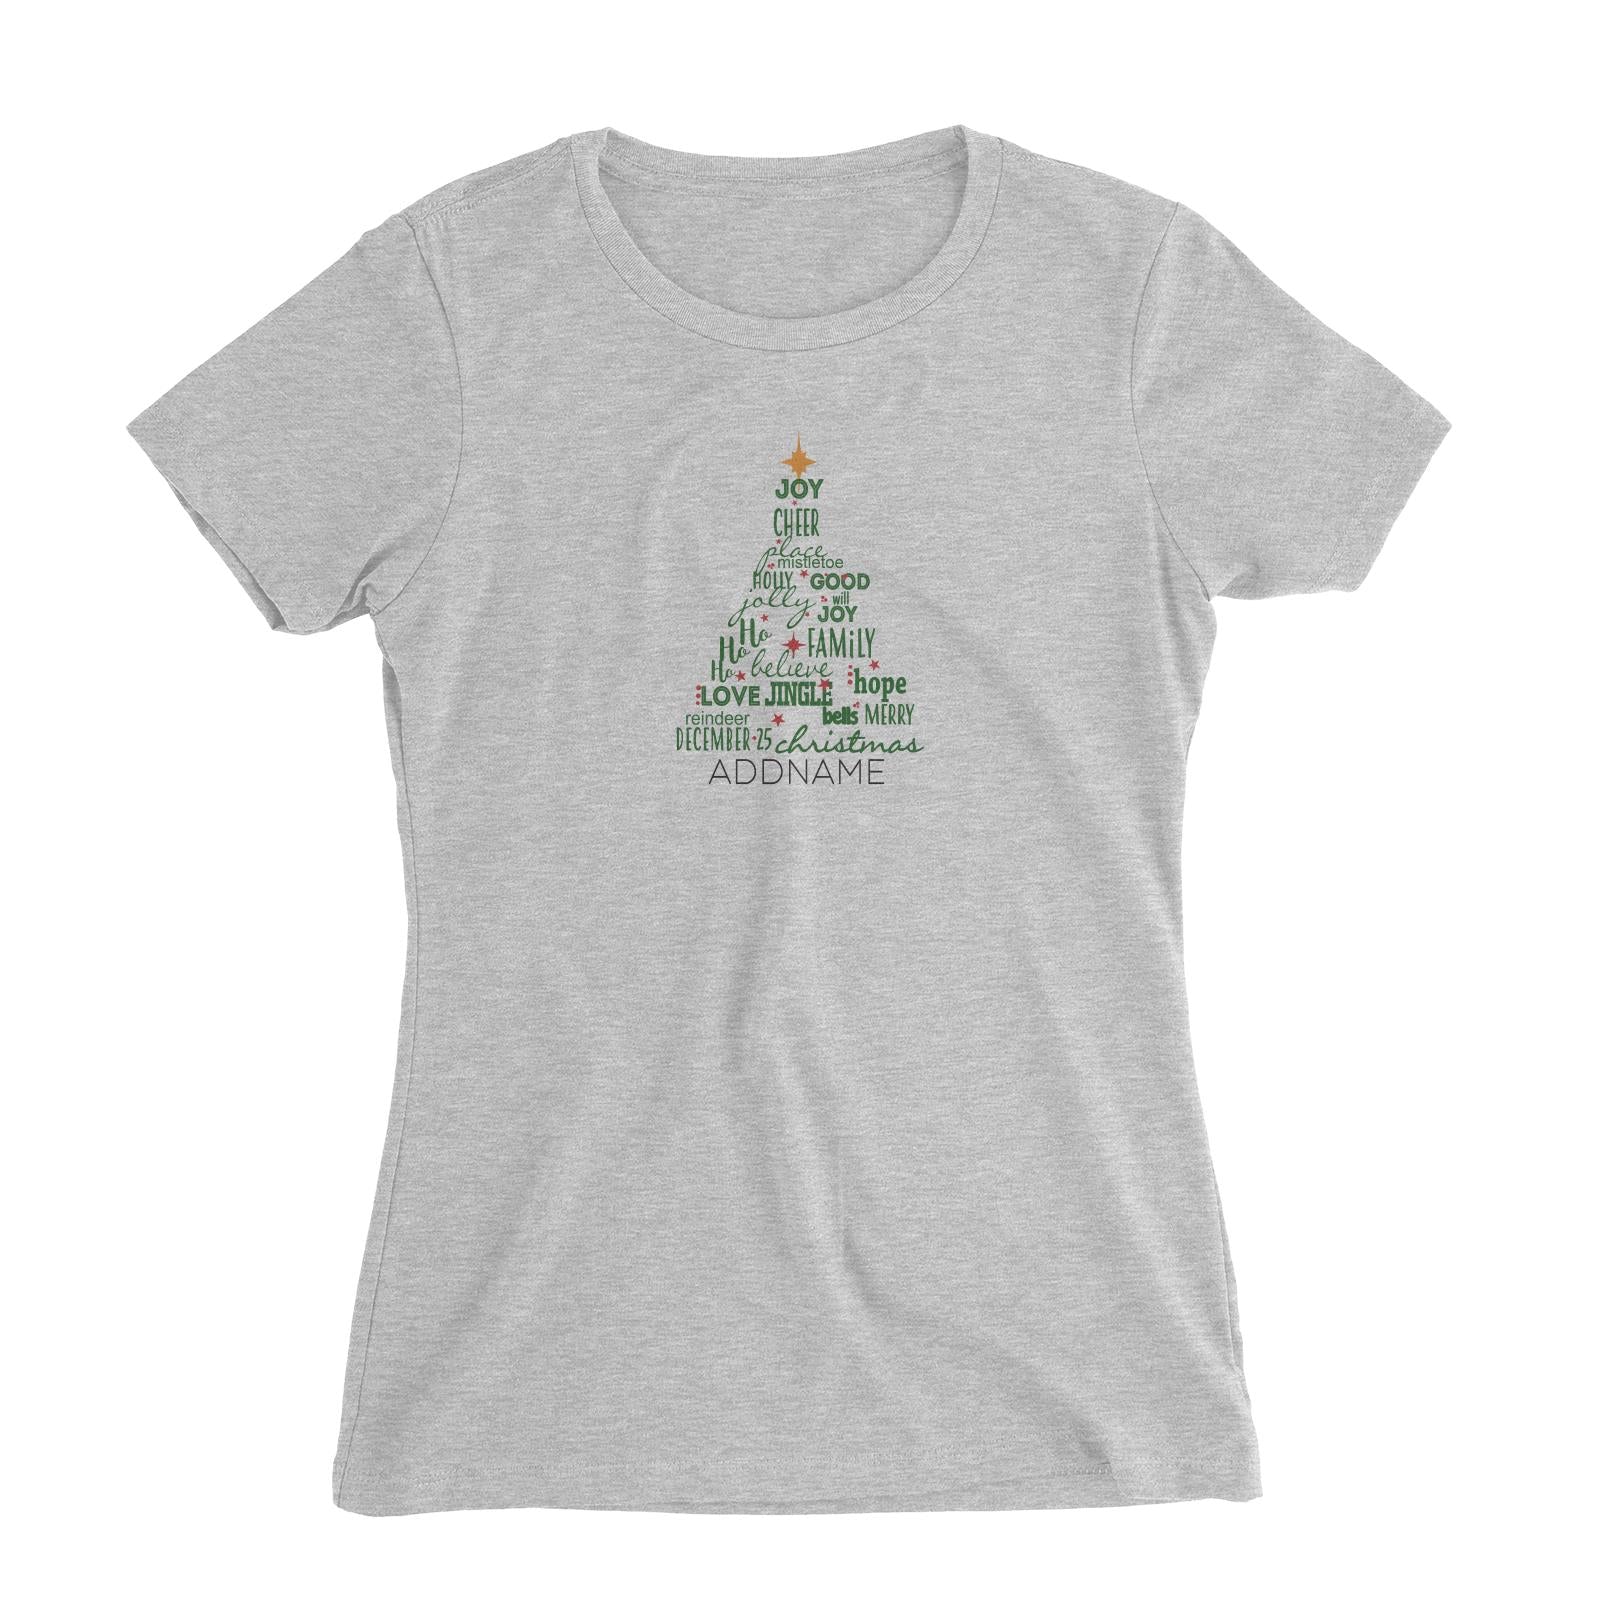 Xmas Christmas Tree with Blessings Words Women's Slim Fit T-Shirt